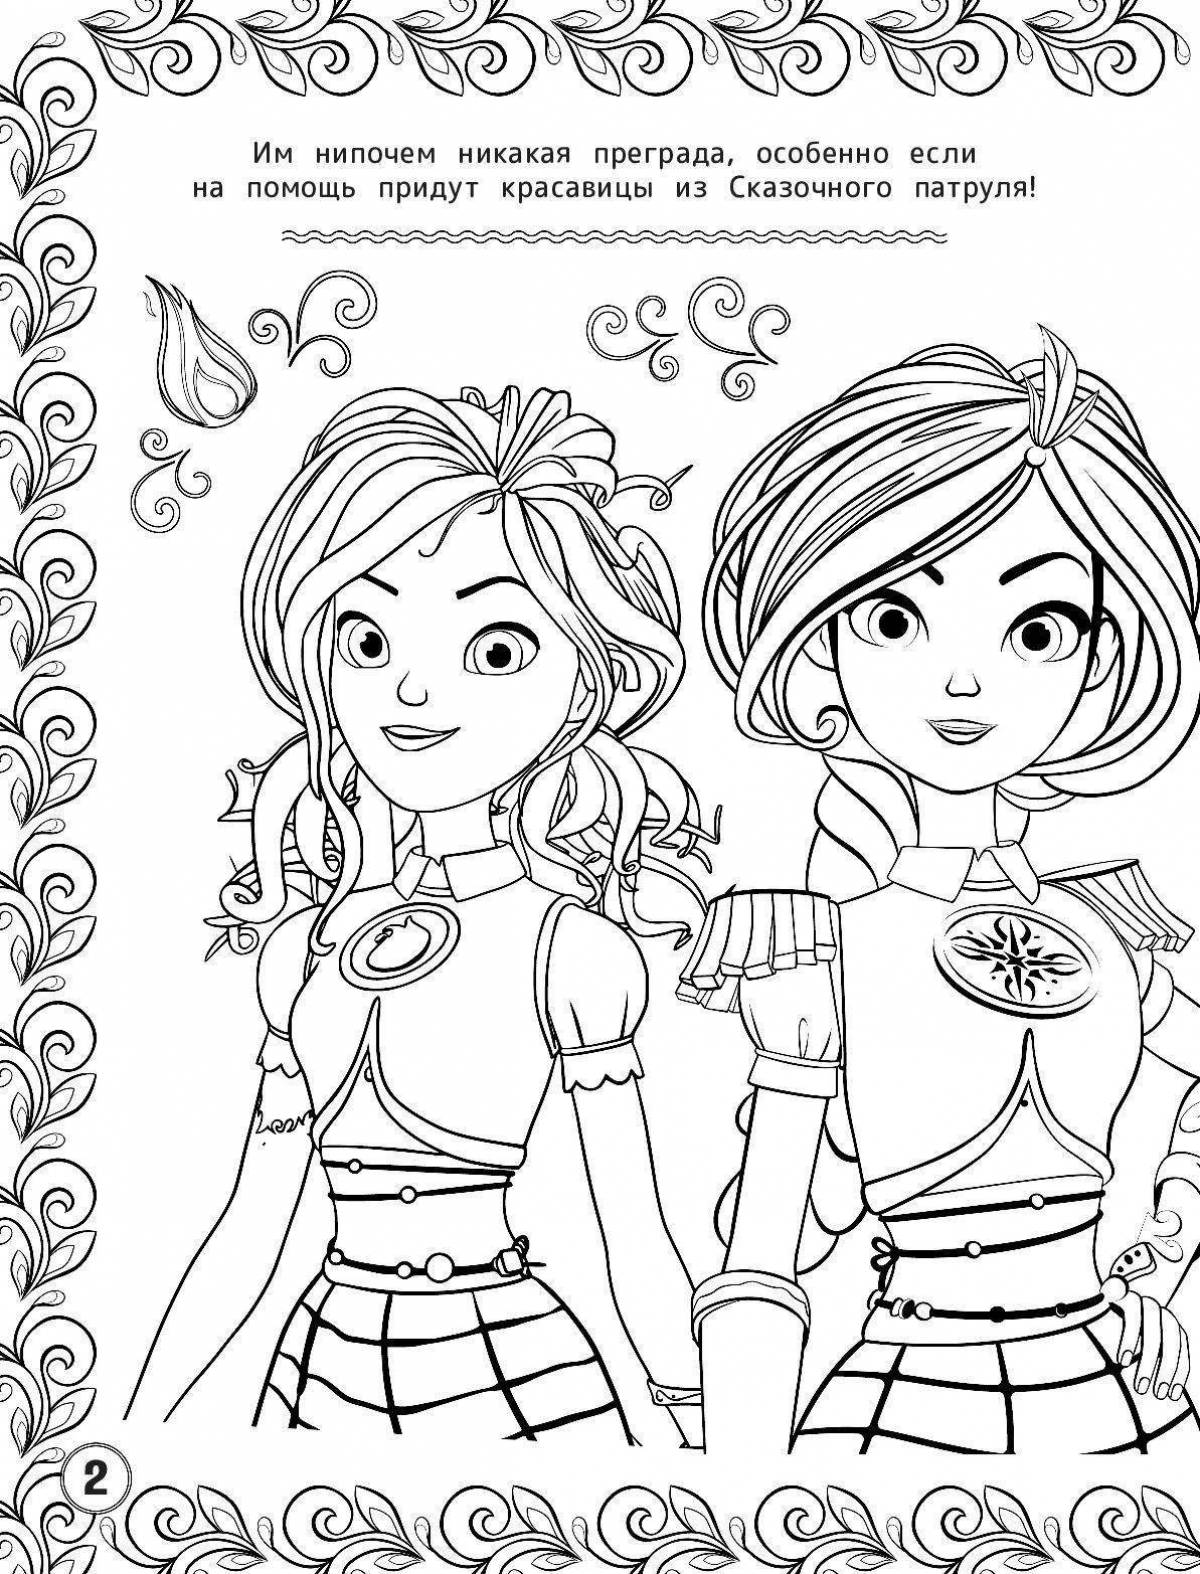 Adorable coloring book start